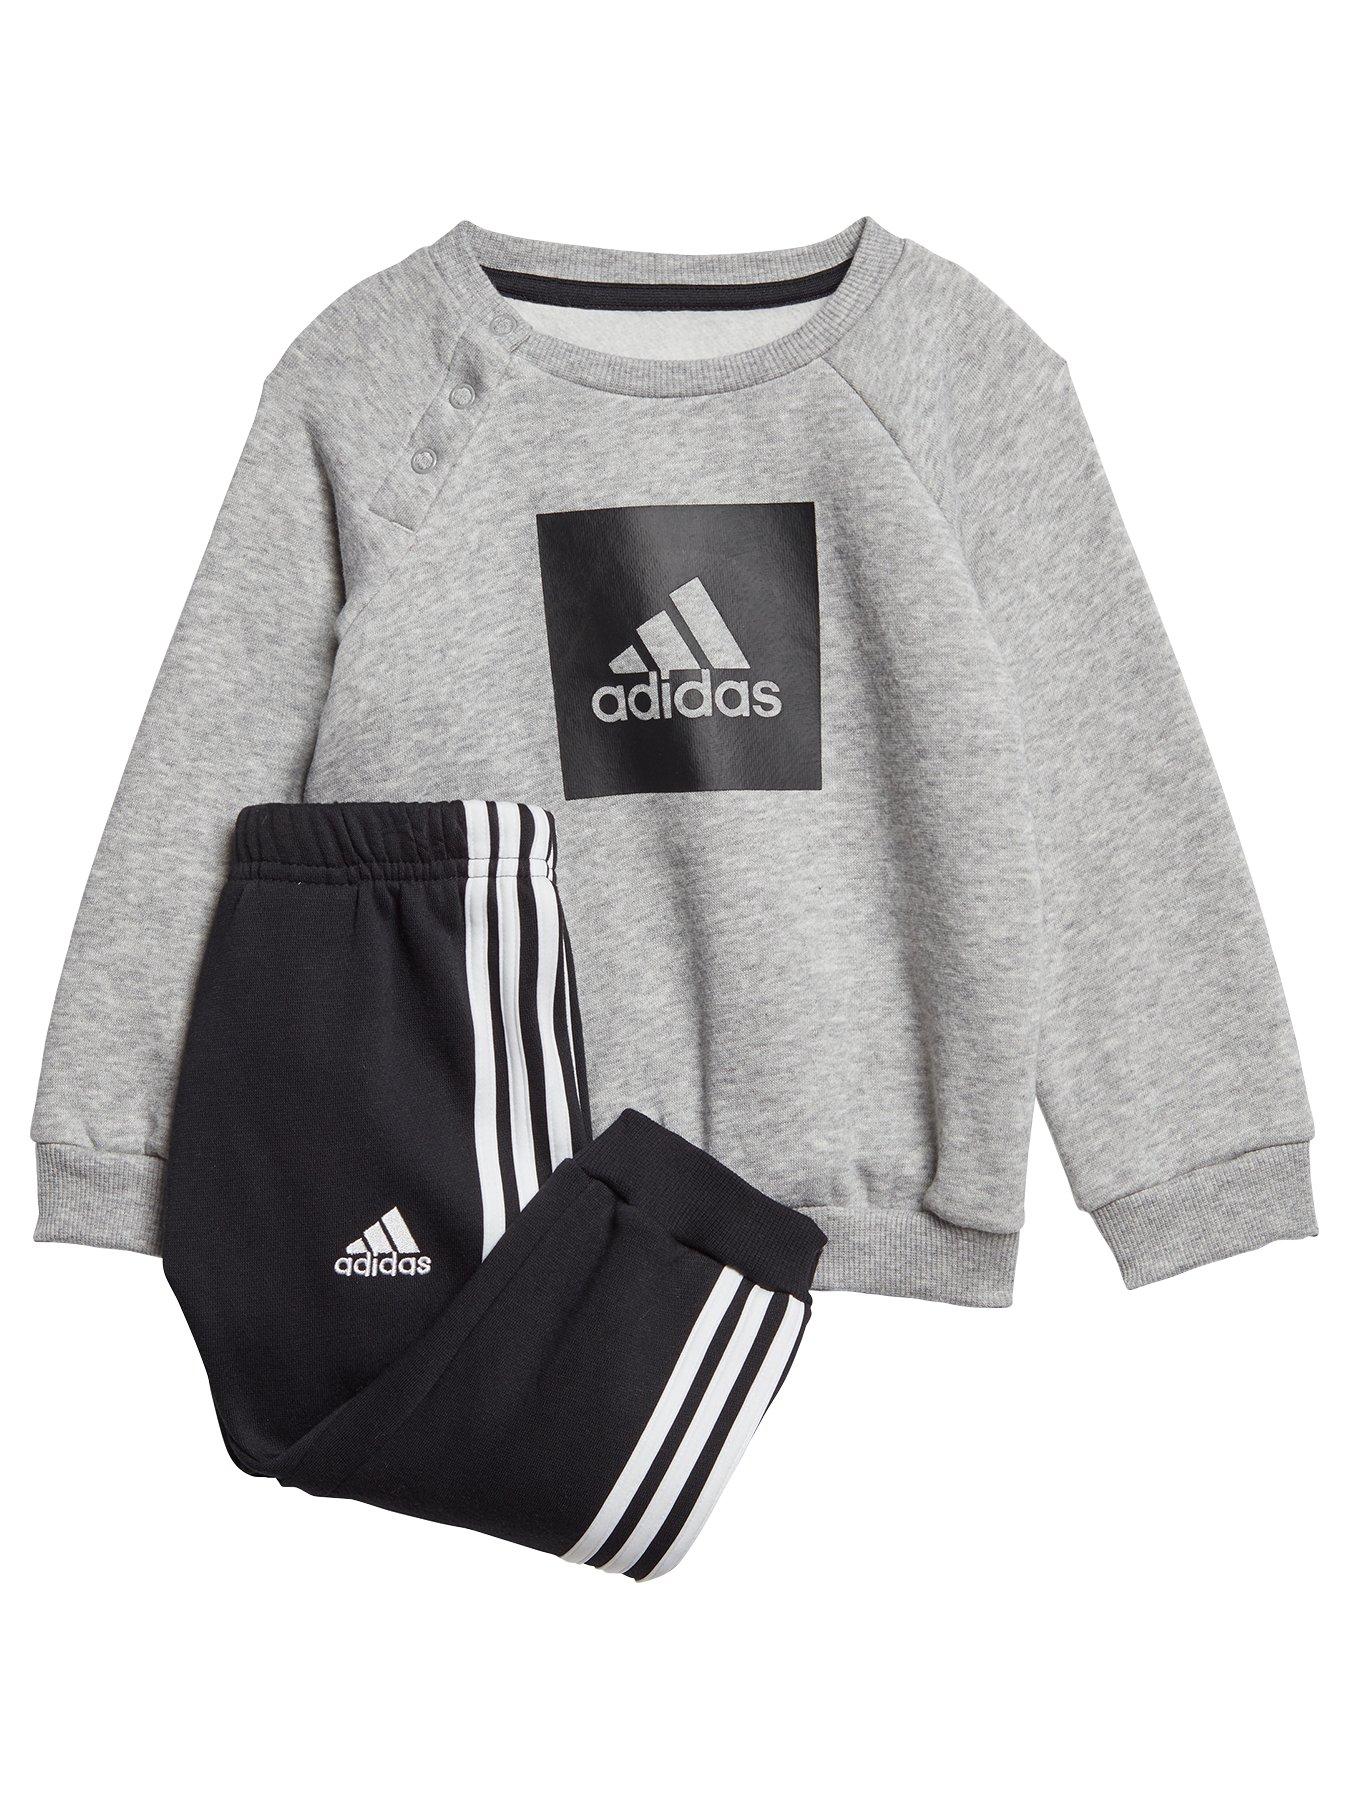 adidas baby clothes 0 3 months